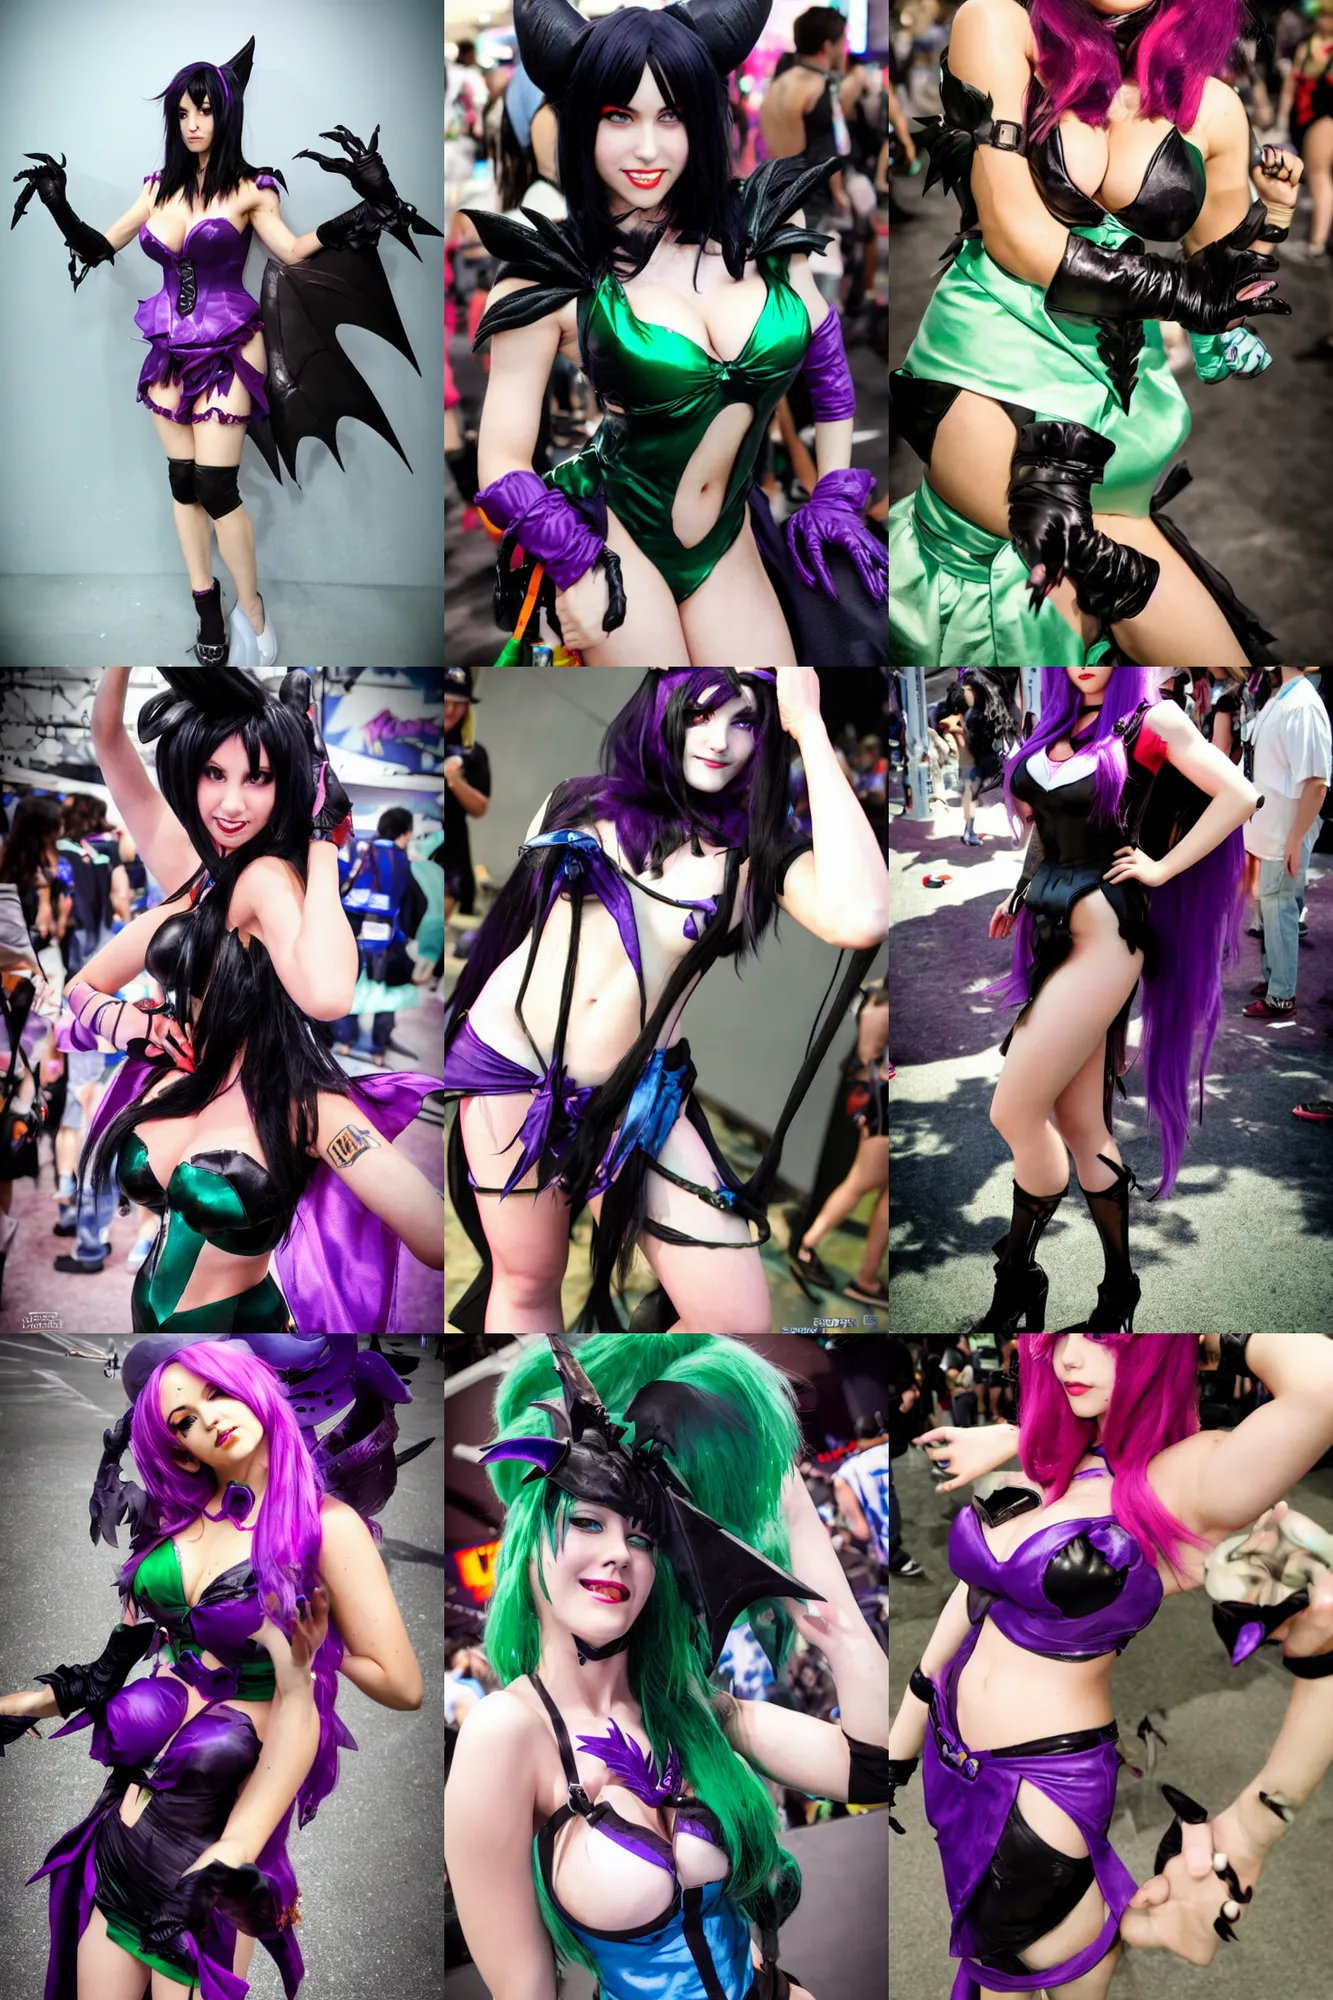 Prompt: darkstalkers morrigan, pretty cosplayer, beautiful face, sweating, photo taken at e 3 expo, electric atmosphere, come - hither expression, posing for camera